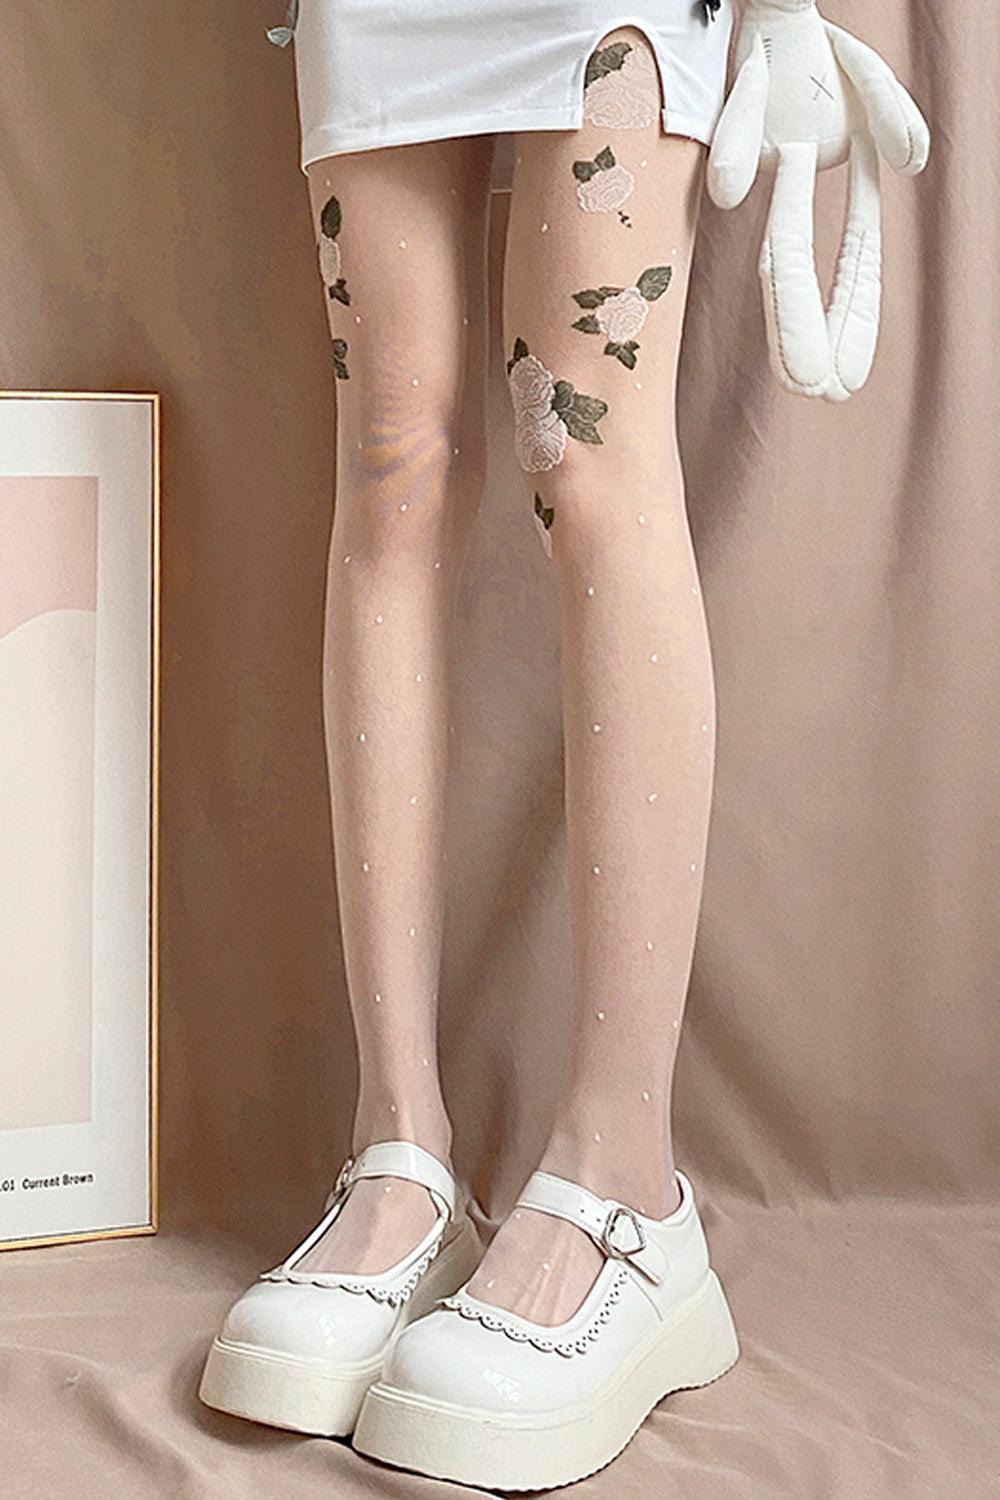 White Roses Thin Translucent Tights - Aesthetic Clothes Shop